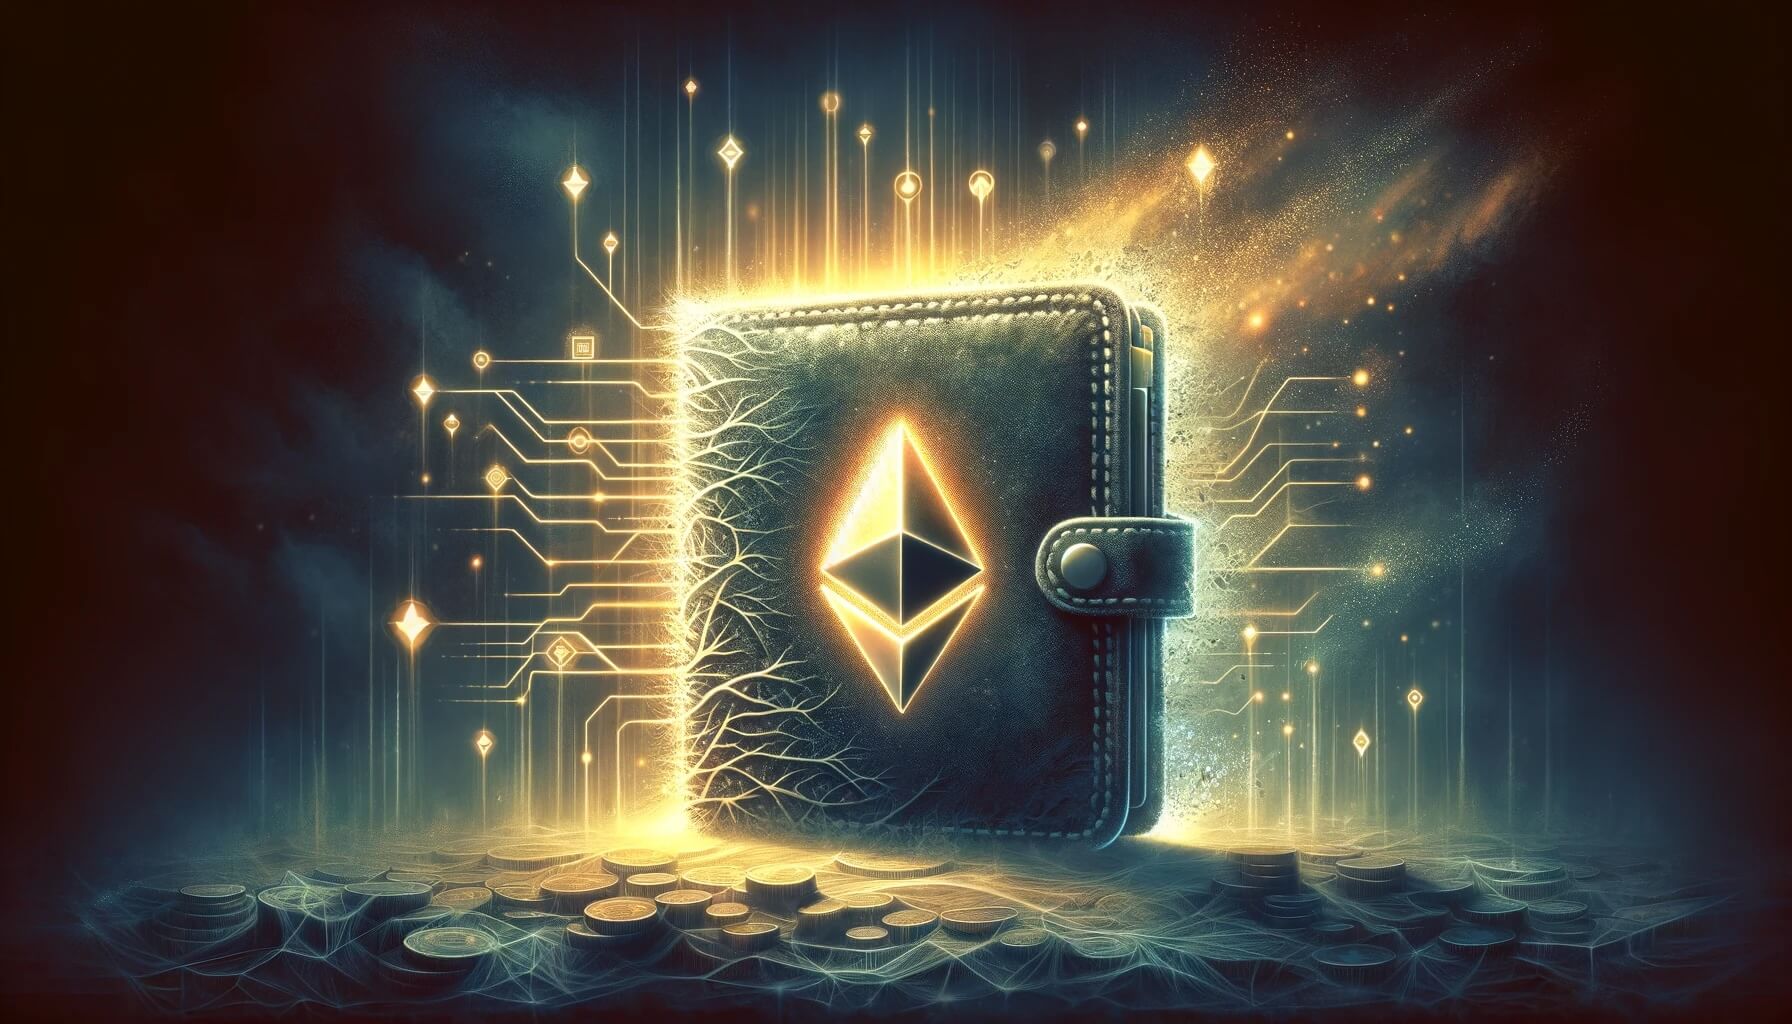  zhu wallet displayed several records incoming ago 